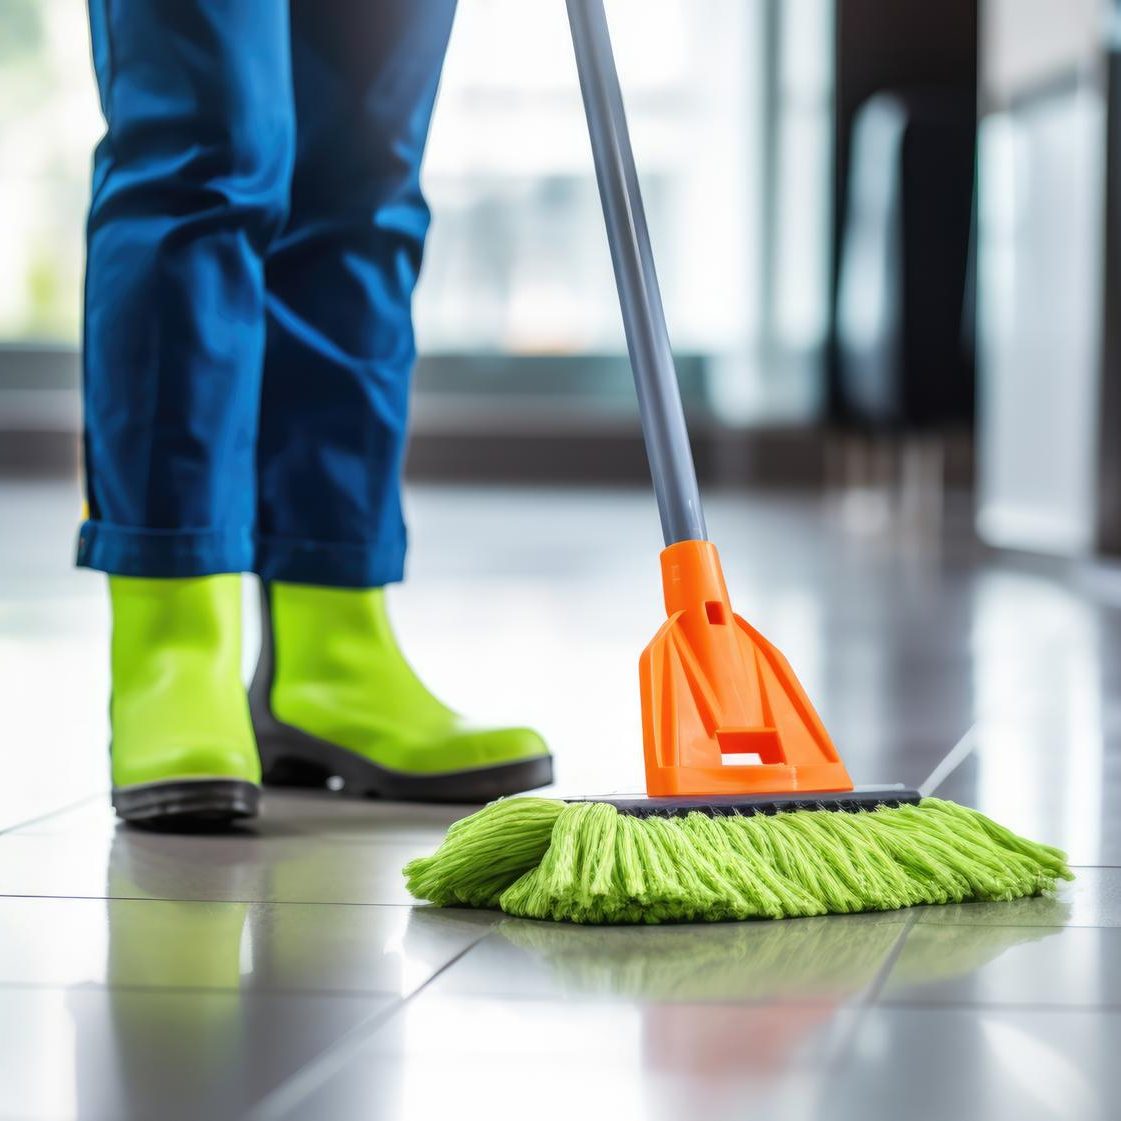 Person mopping floor with green mop and wearing bright green boots.